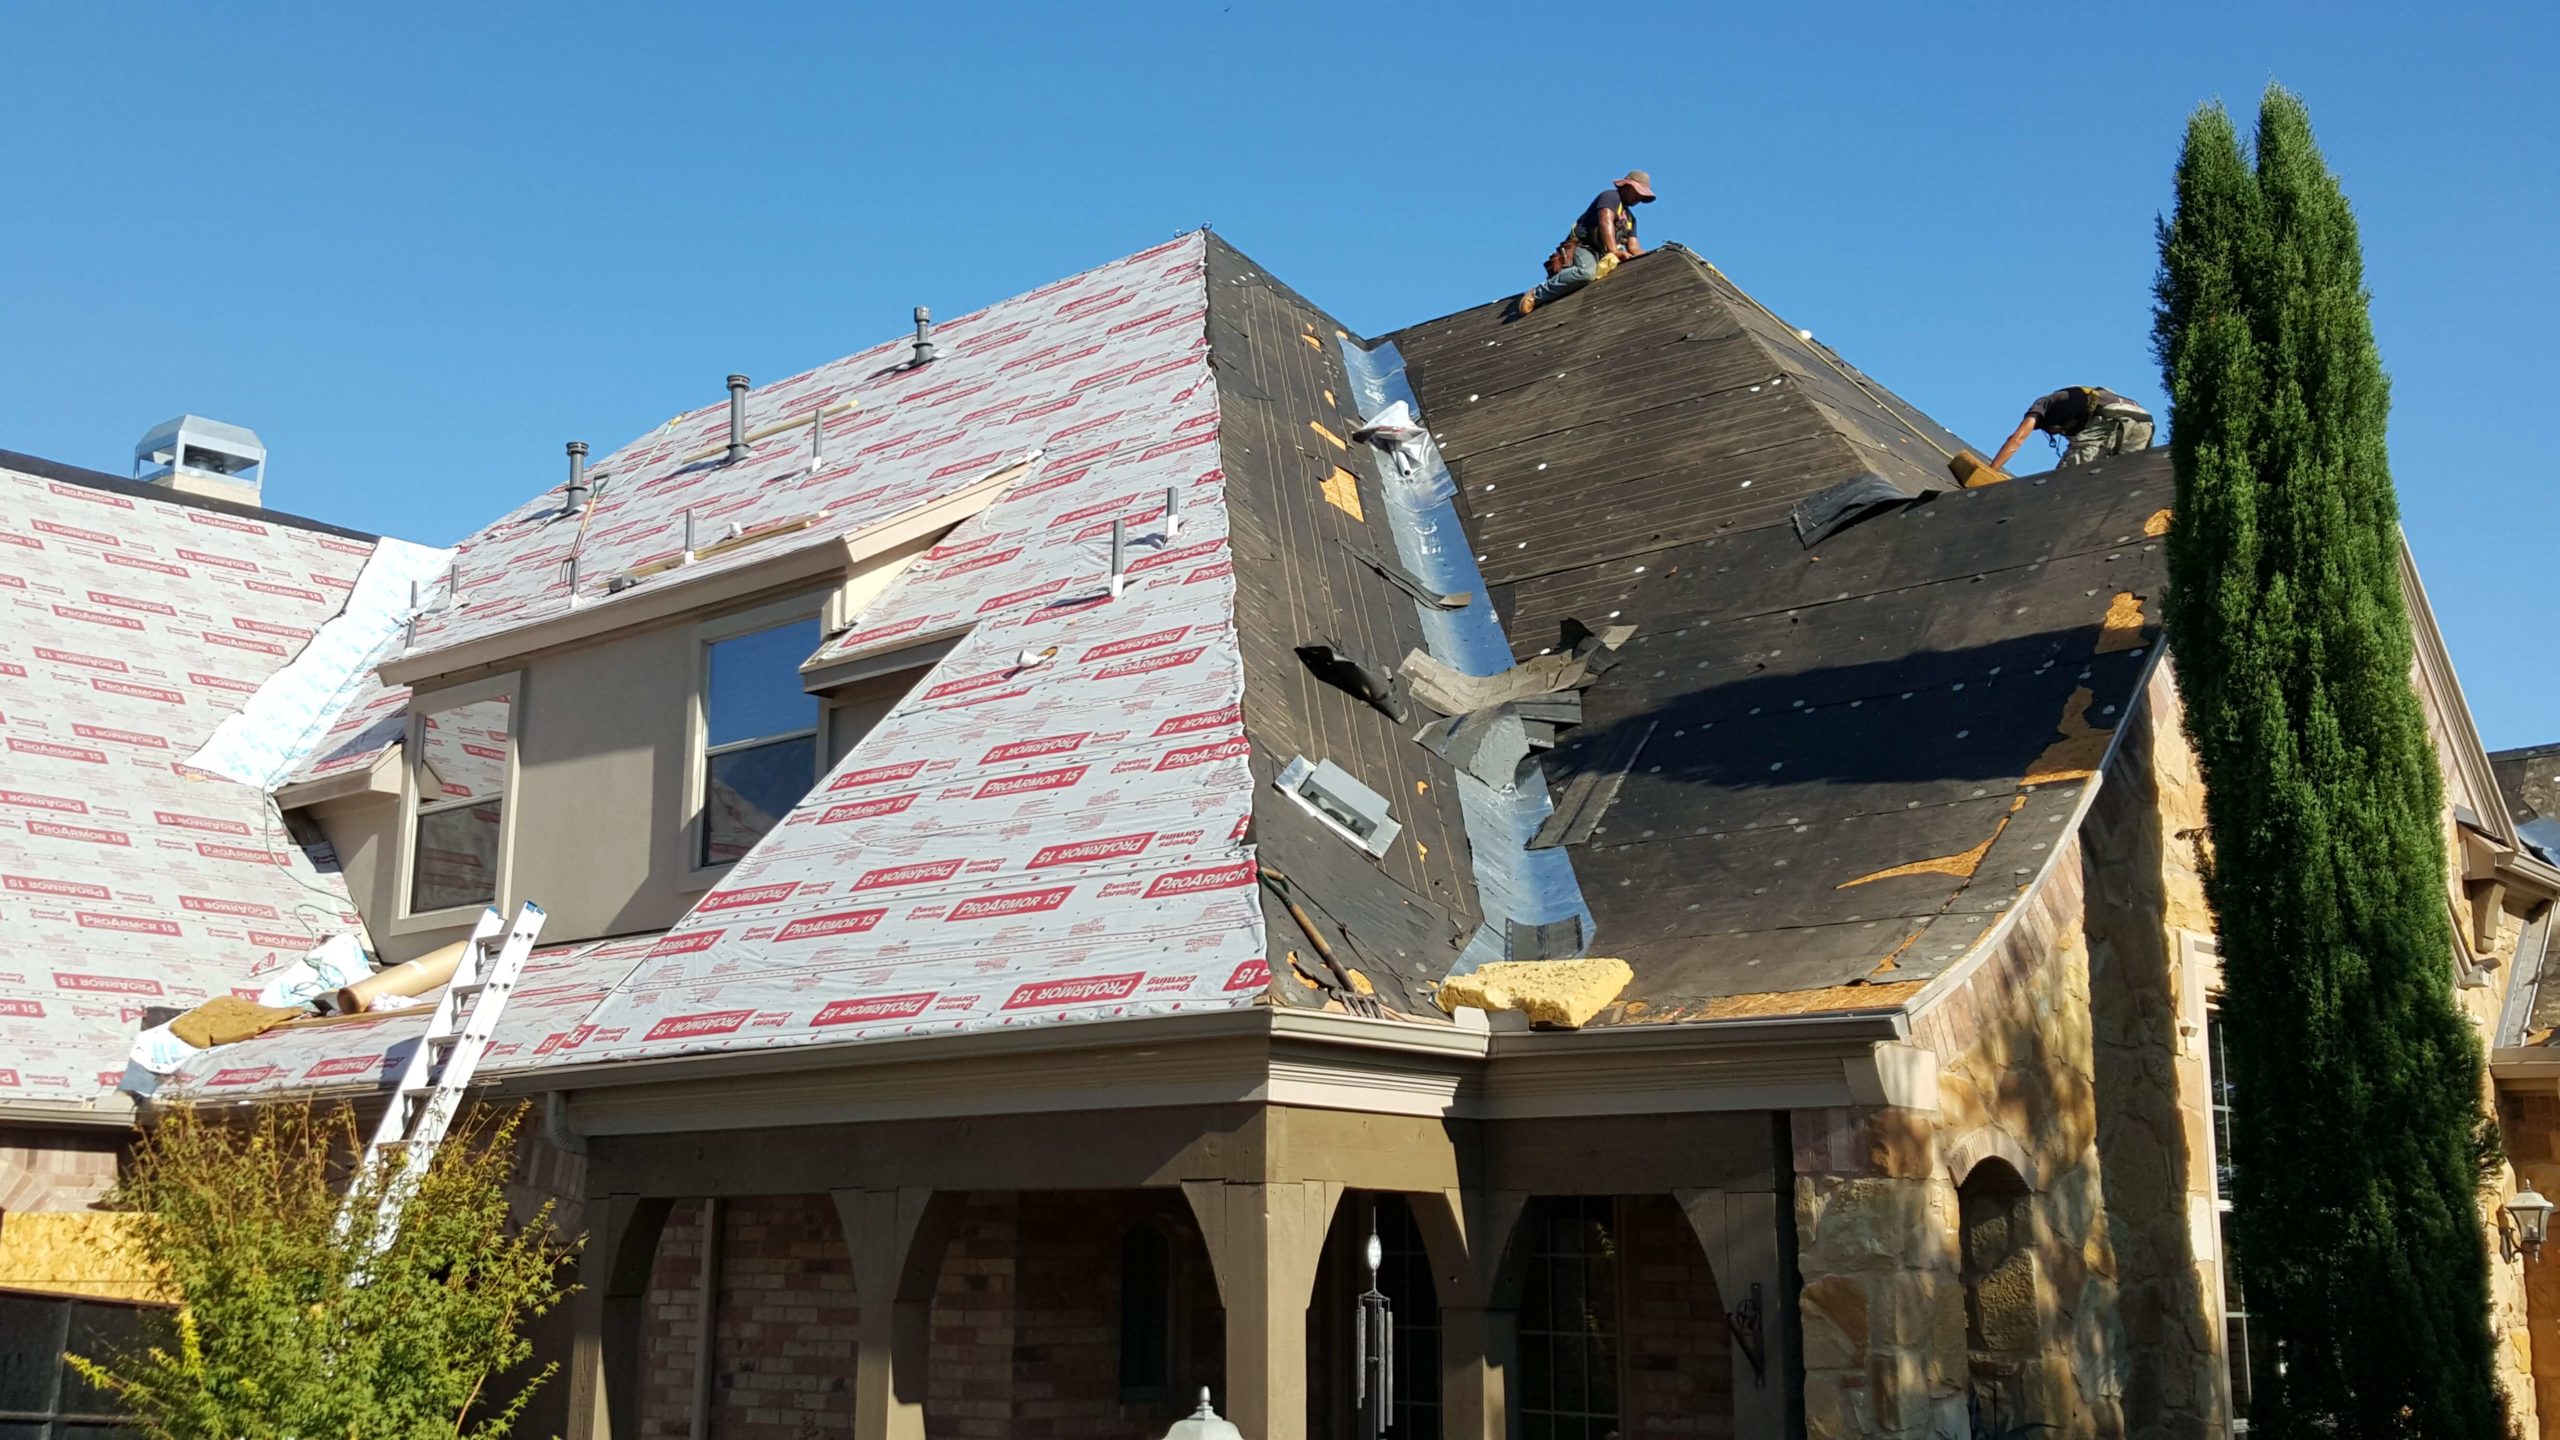 A TAG Roofing & Exteriors crew installing a new roof on a home in Austin, Texas.